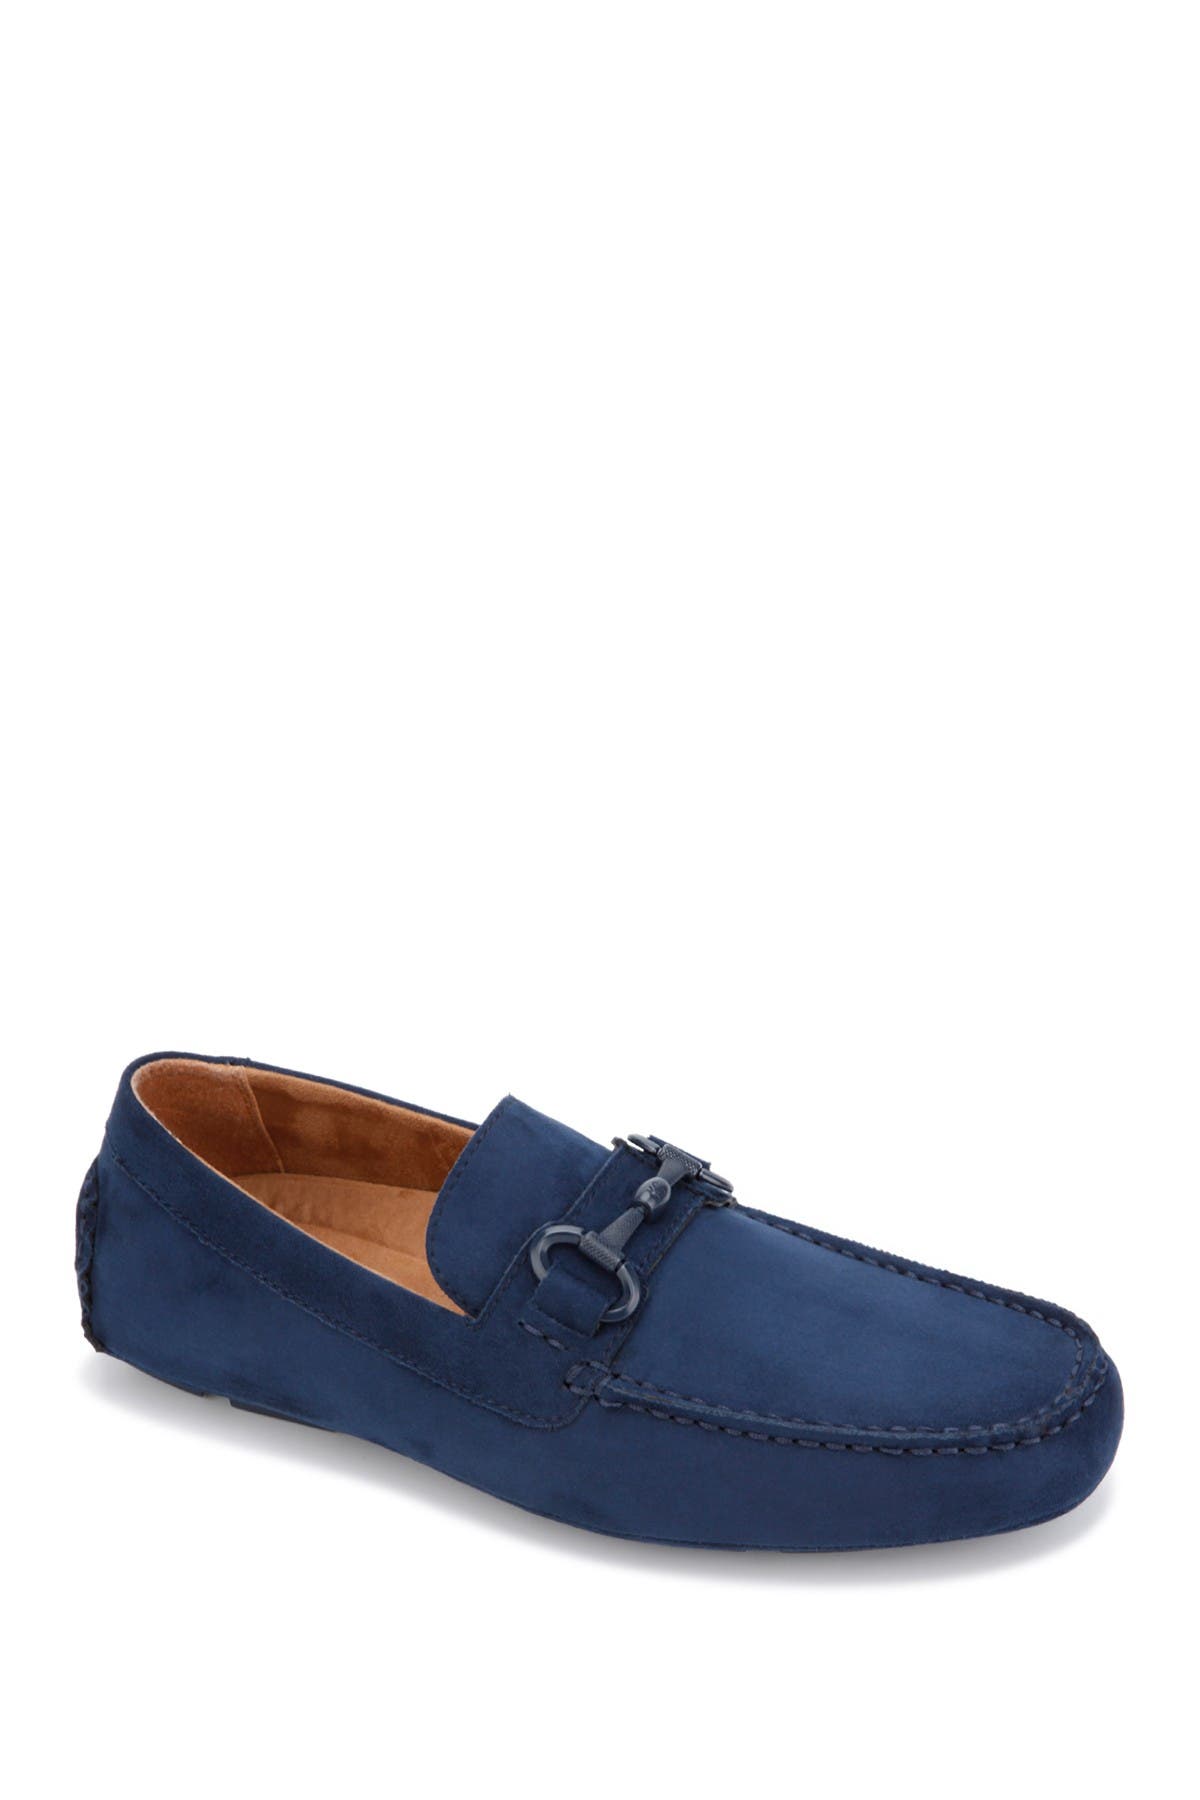 Men's Loafers \u0026 Slip-Ons Clearance 